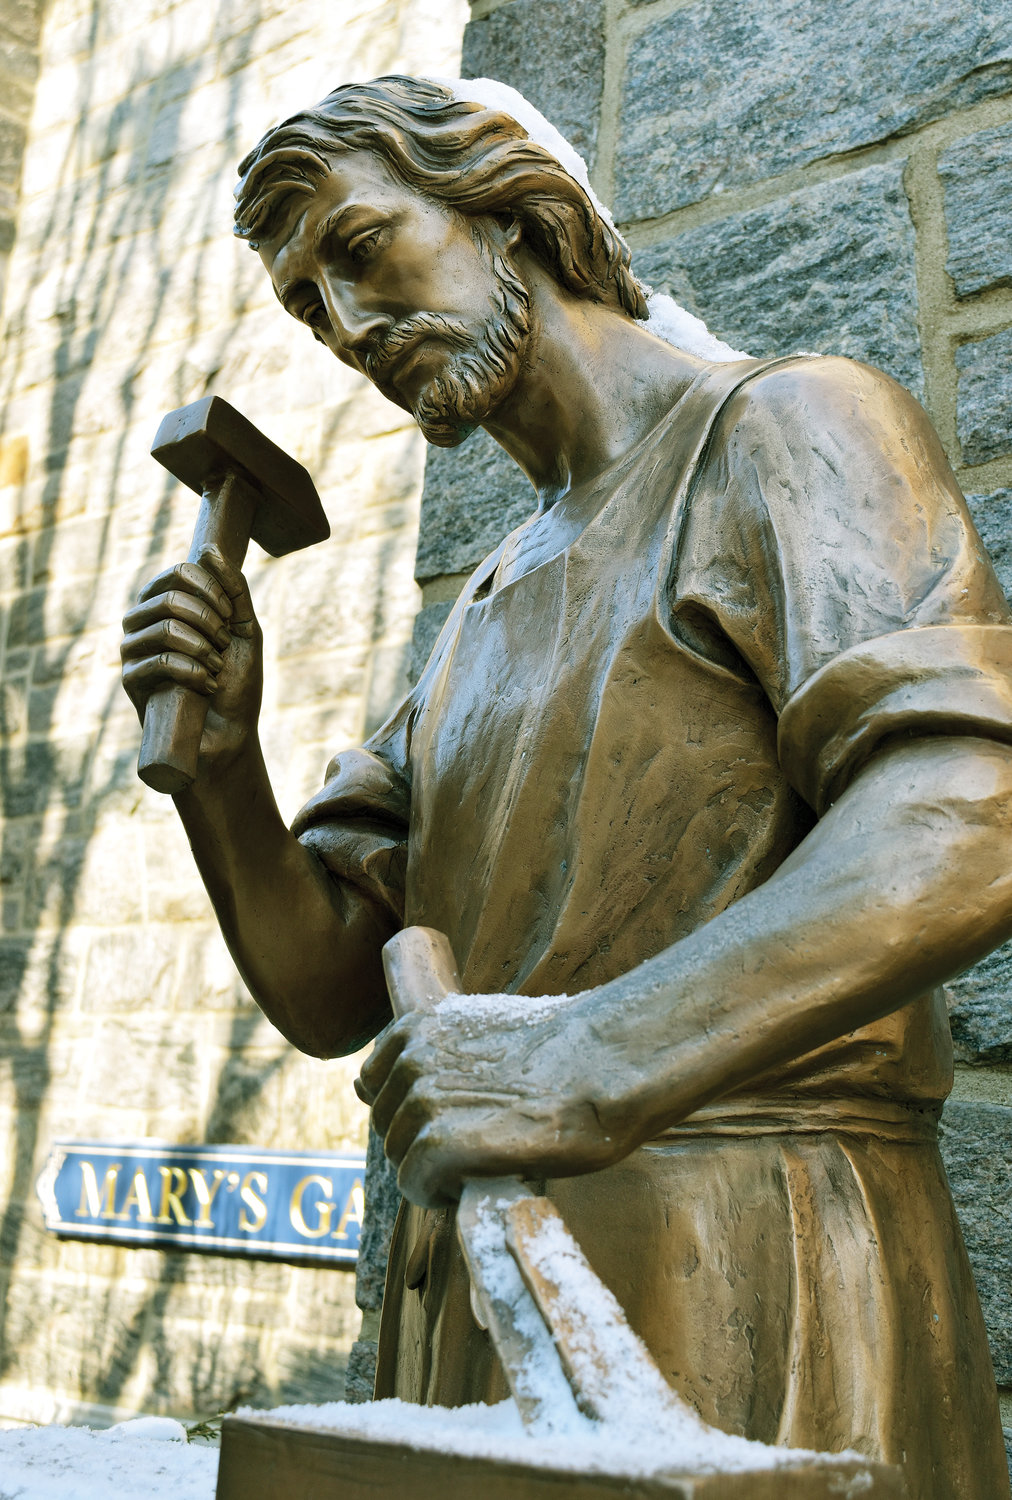 Lifelike bronze statue of St. Joseph at work holds a place of honor at St. Joseph’s parish in Bronxville.